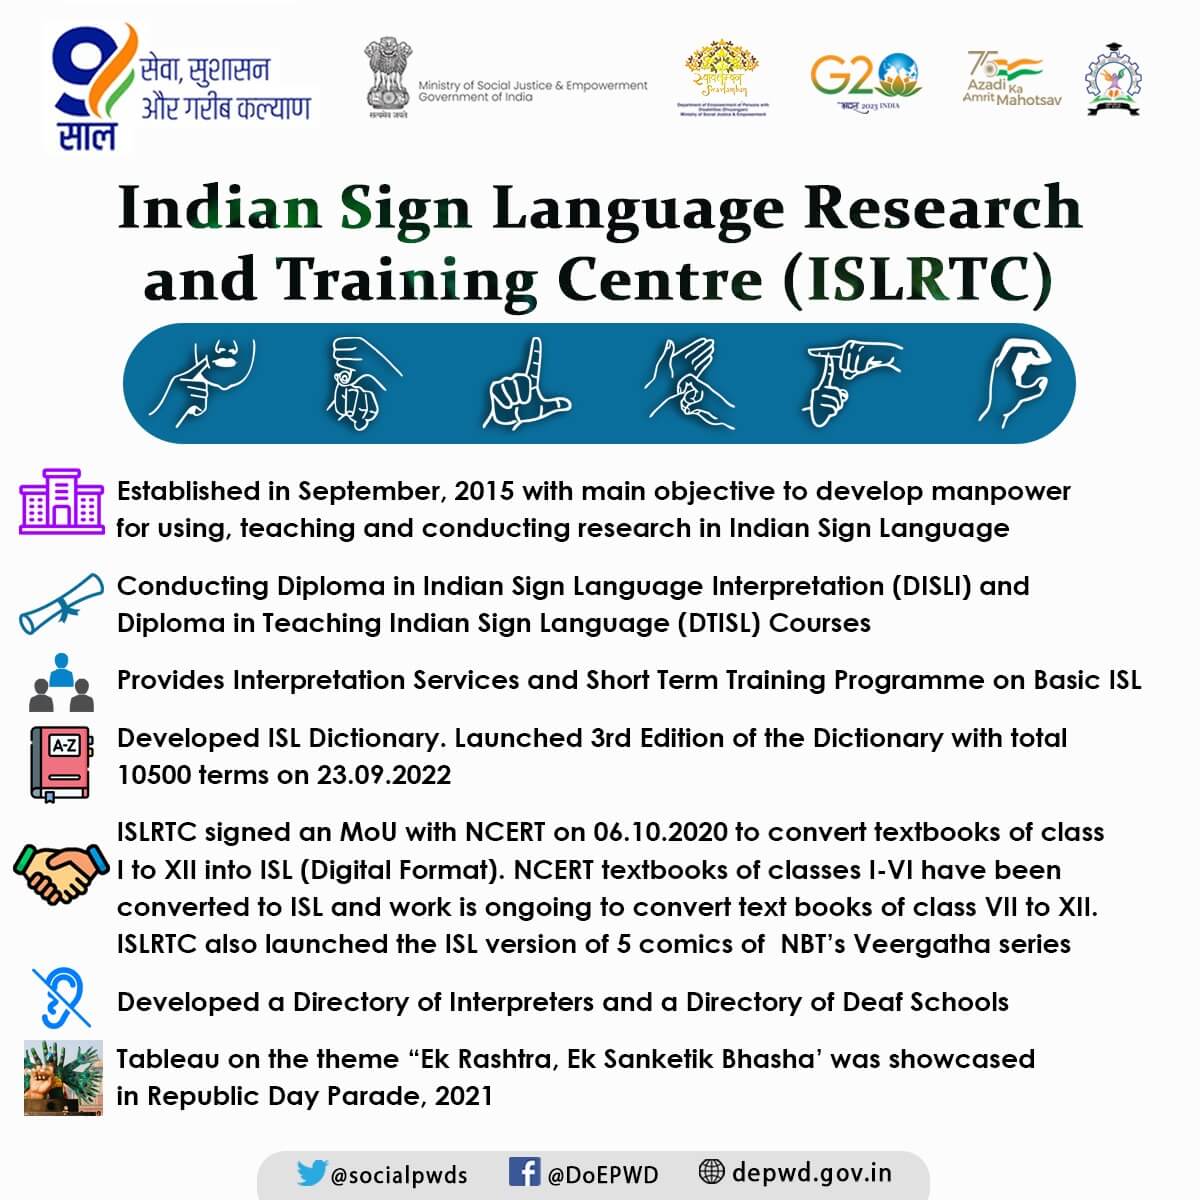 The Indian Sign Language Research and Training Centre (ISLRTC)